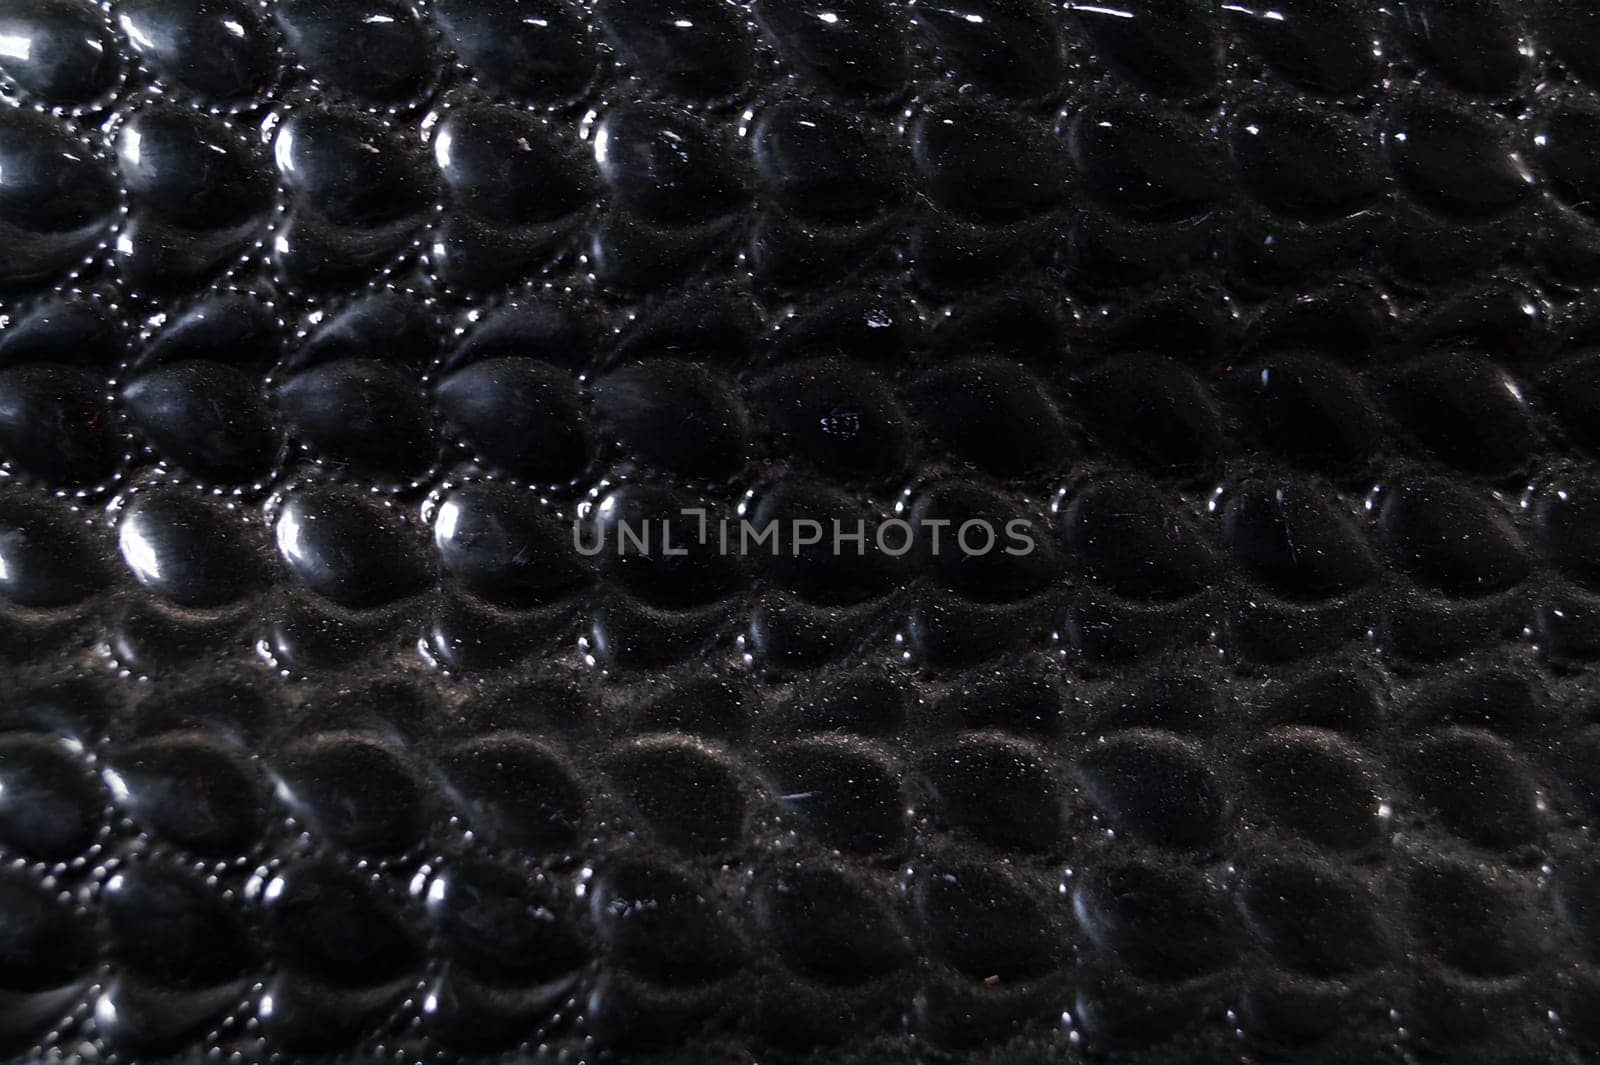 A close up of a black leather item with a pattern of small black dots by gadreel